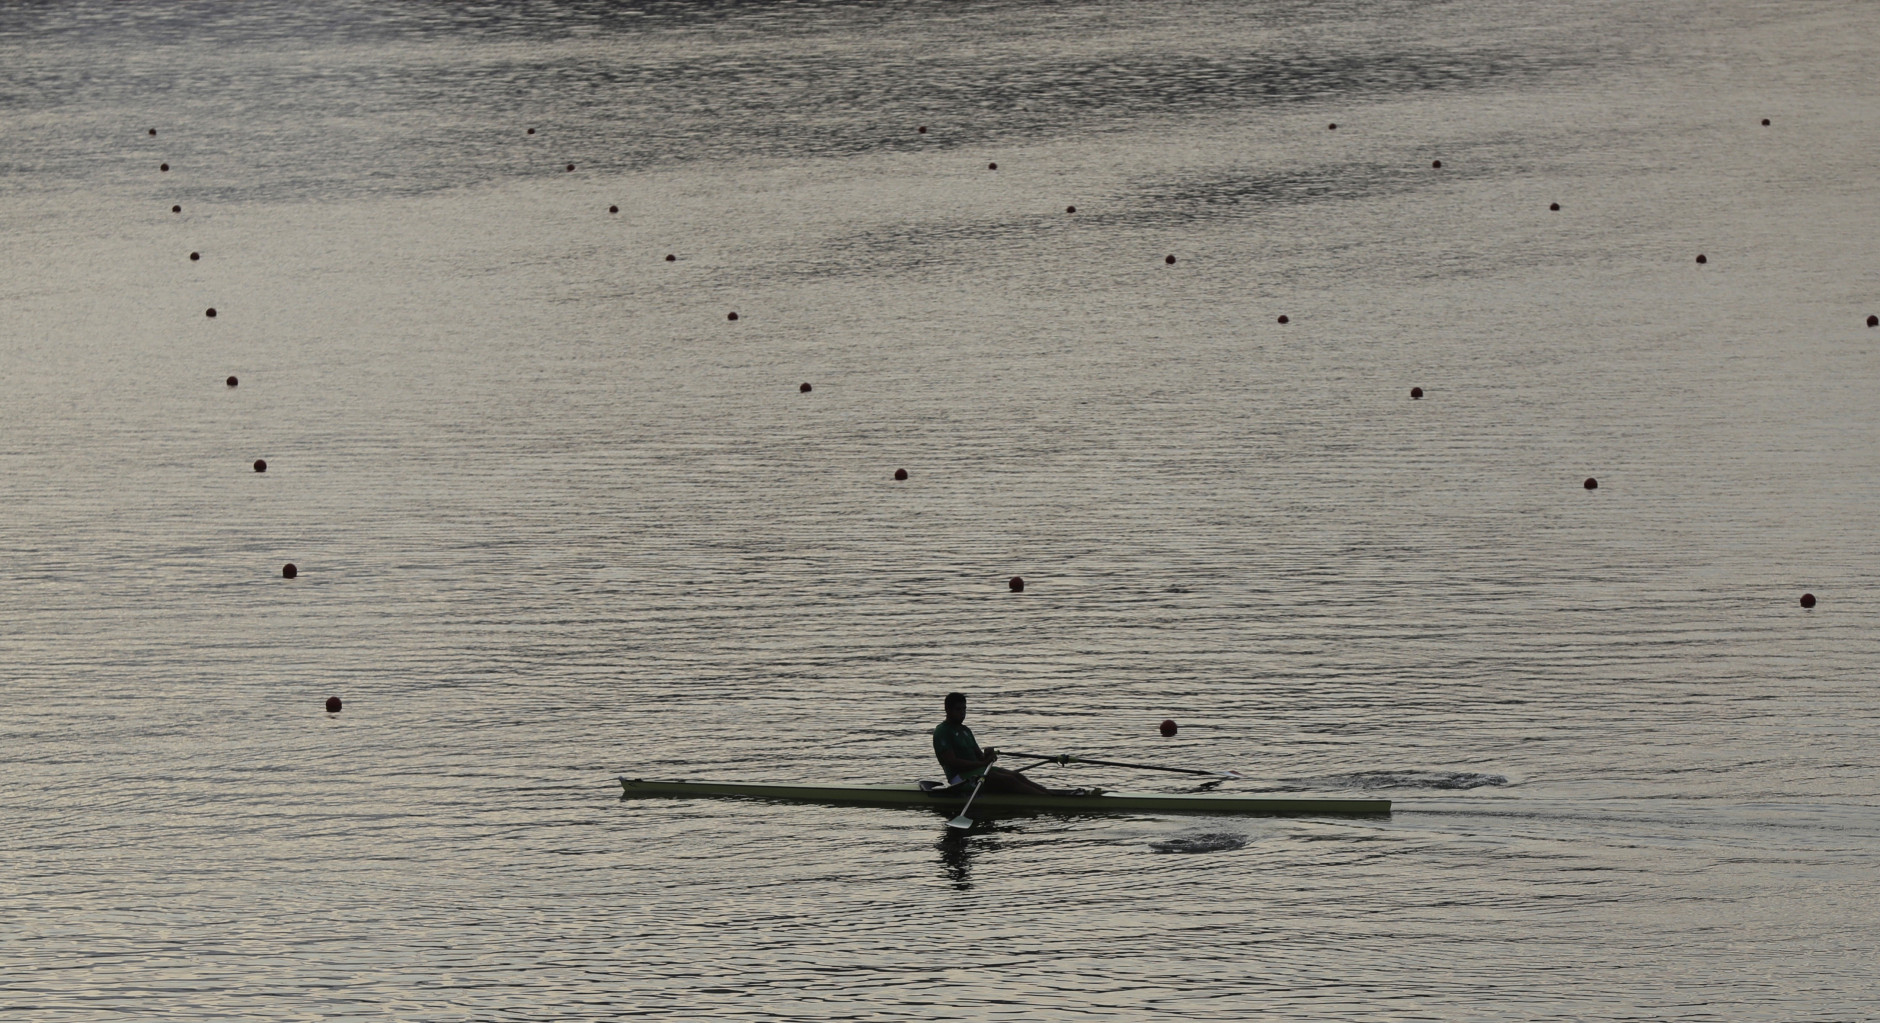 A rower practices prior to competition during the 2016 Summer Olympics in Rio de Janeiro, Brazil, Tuesday, Aug. 9, 2016. (AP Photo/Luca Bruno)